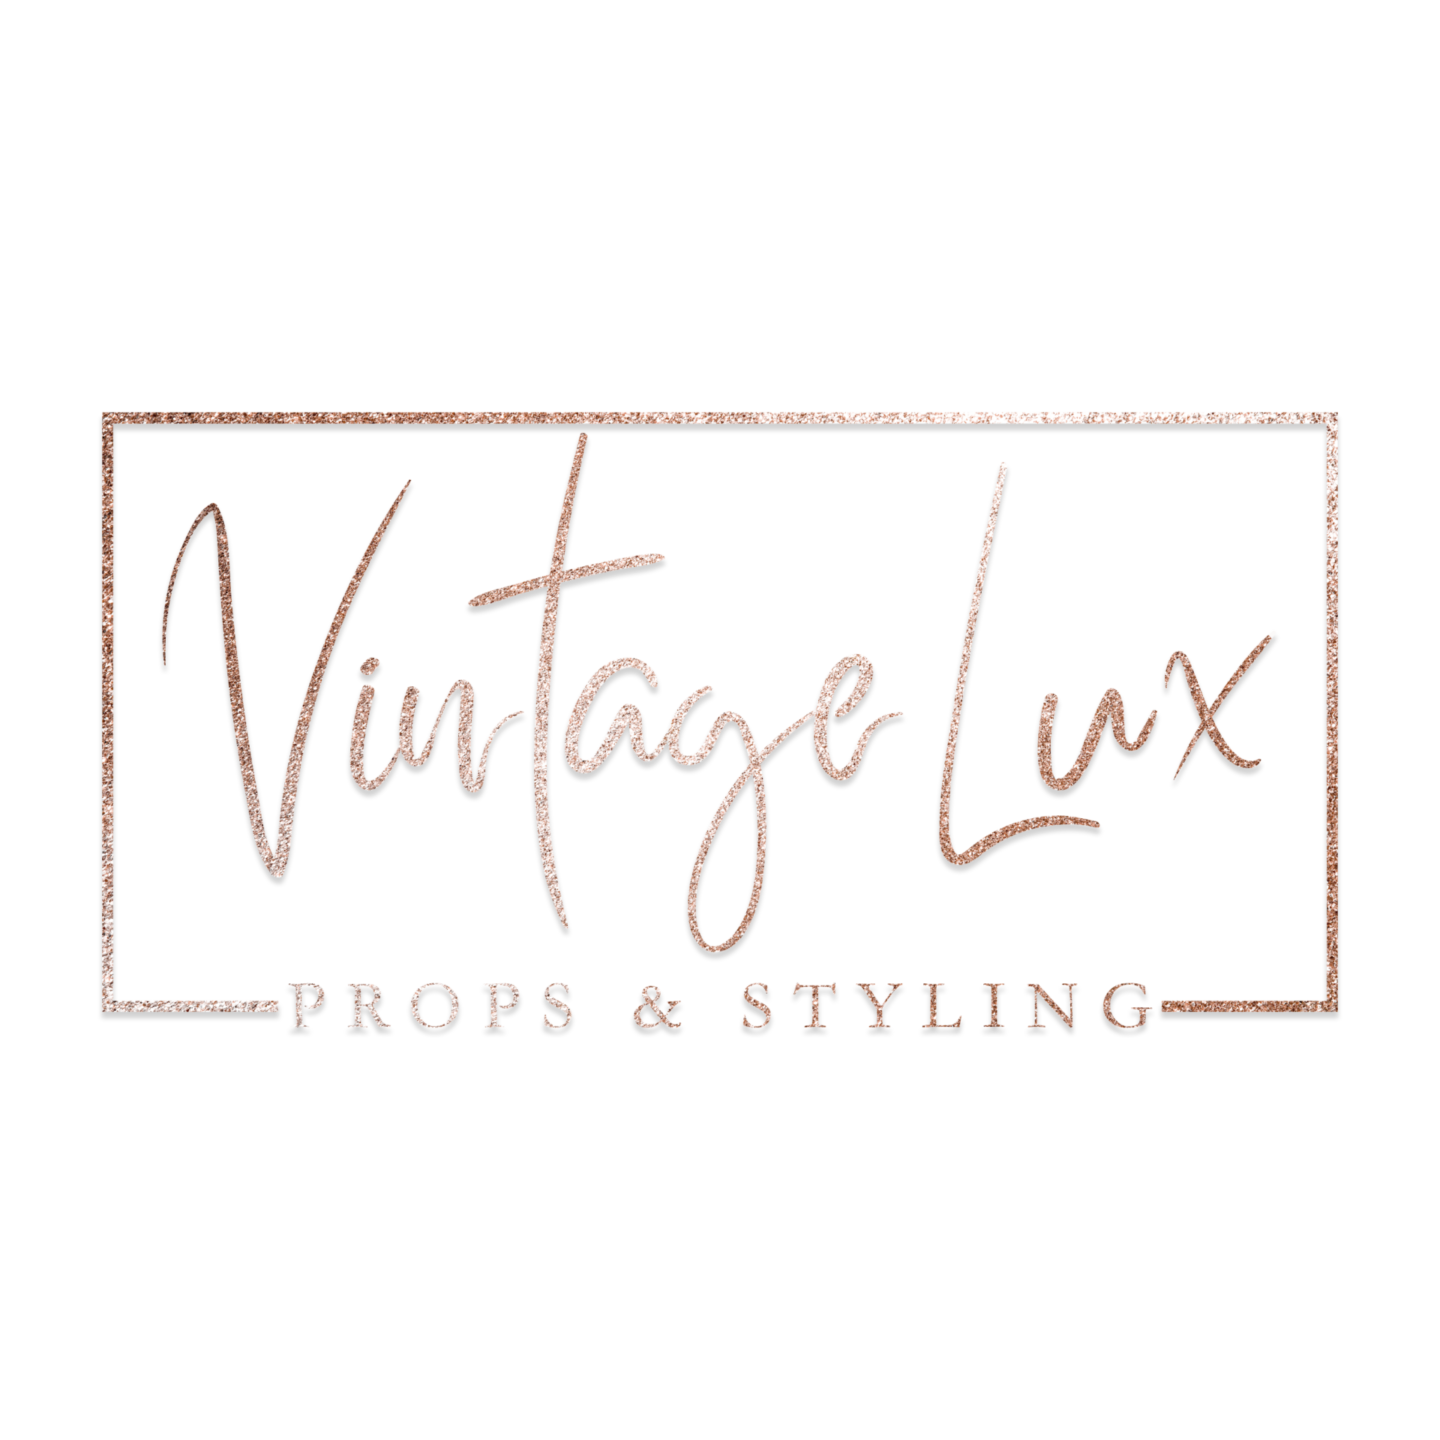 Vintage Lux Props & Styling